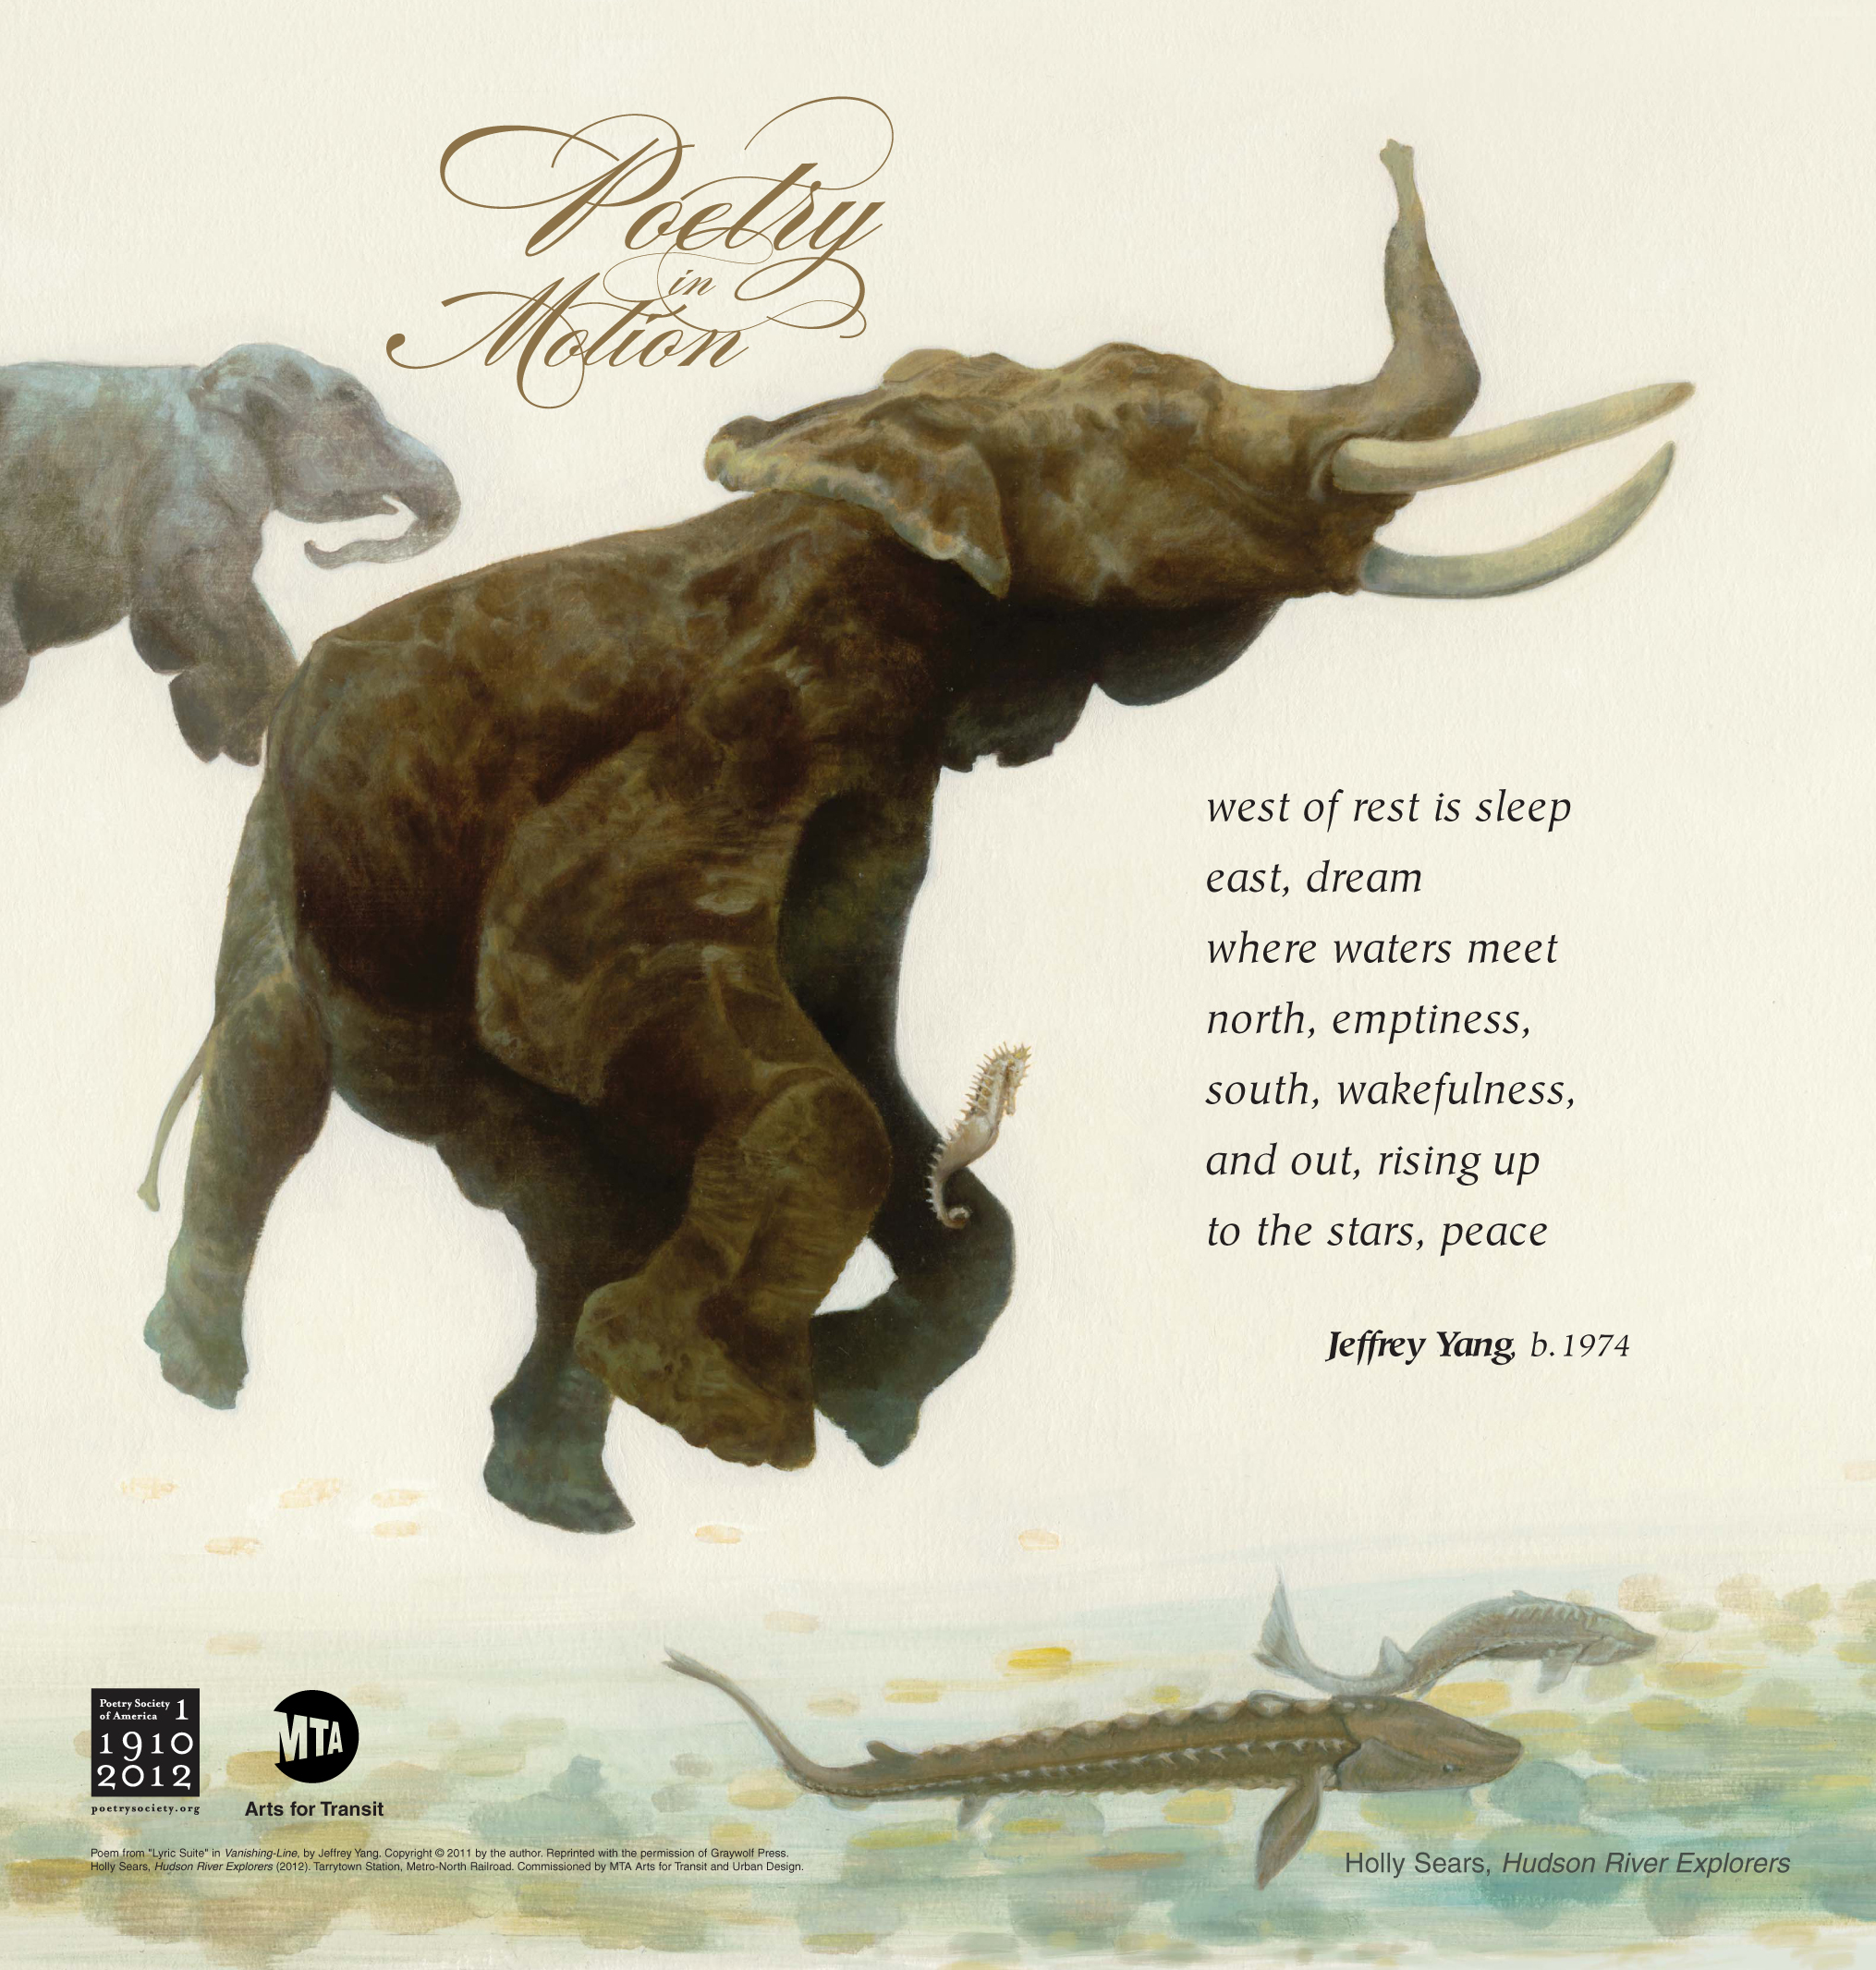 A poster featuring art by Holly Sears depicts a surreal oil painting of floating elephants and sea creatures. The backdrop consists of muted greens and yellows. The poster includes a poem titled West of rest is sleep, written by Jeffrey Yang.